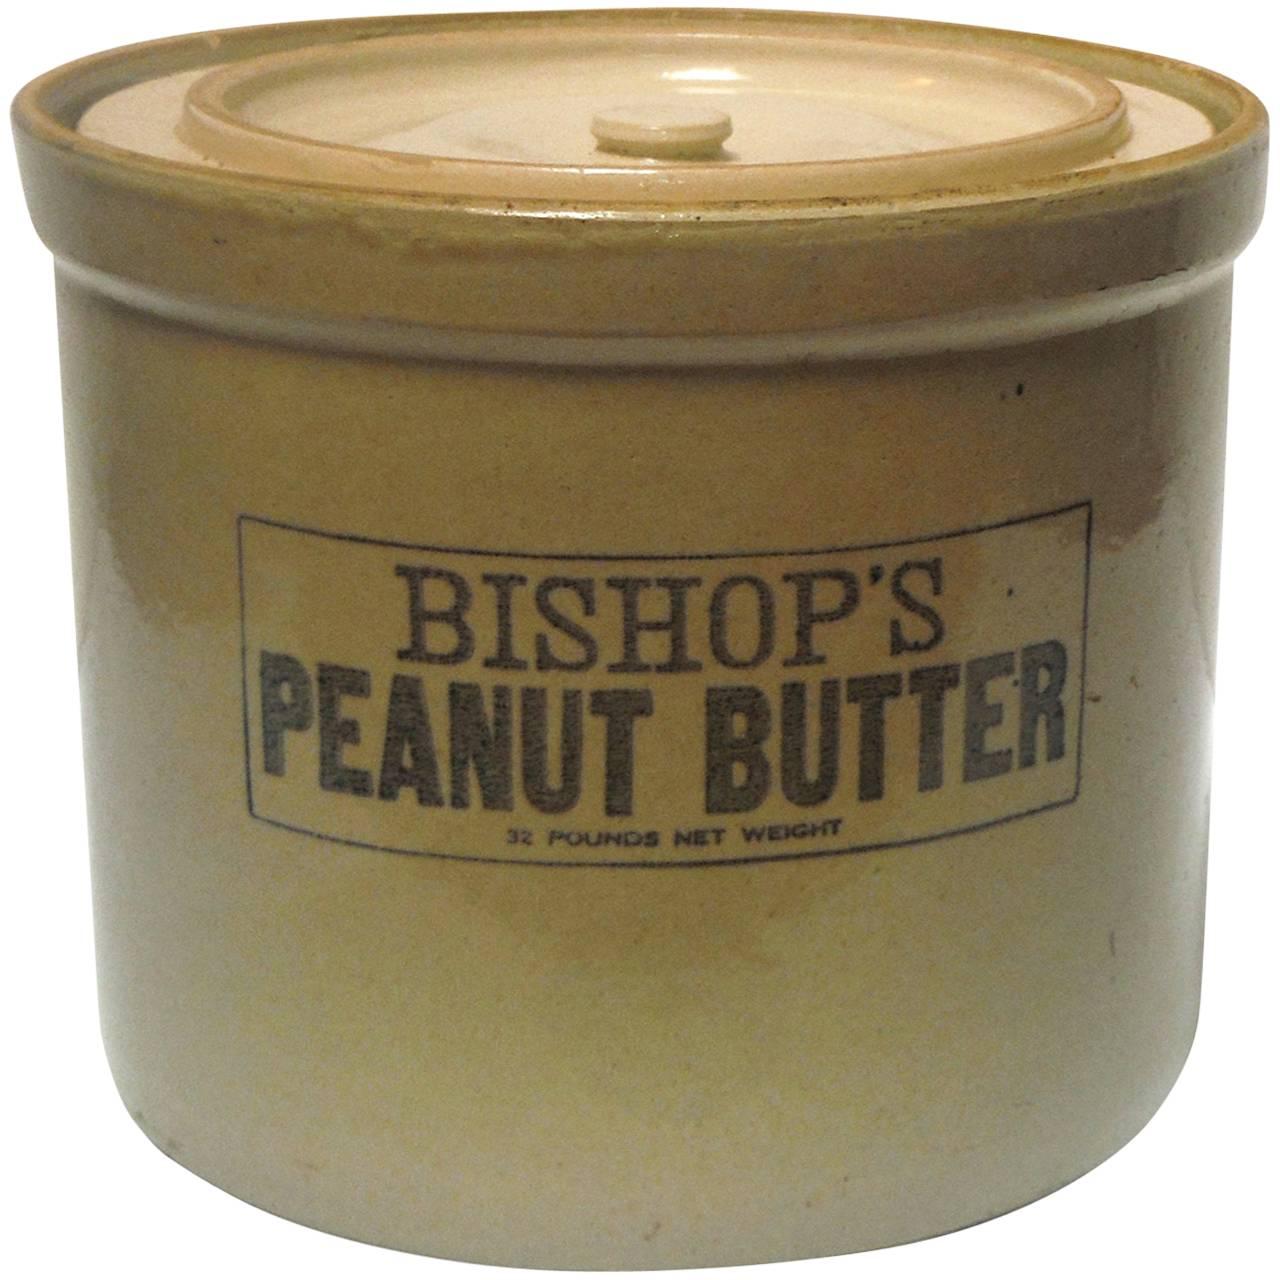 Large 19th Century "Bishops Peanut Butter" Crock with Lid